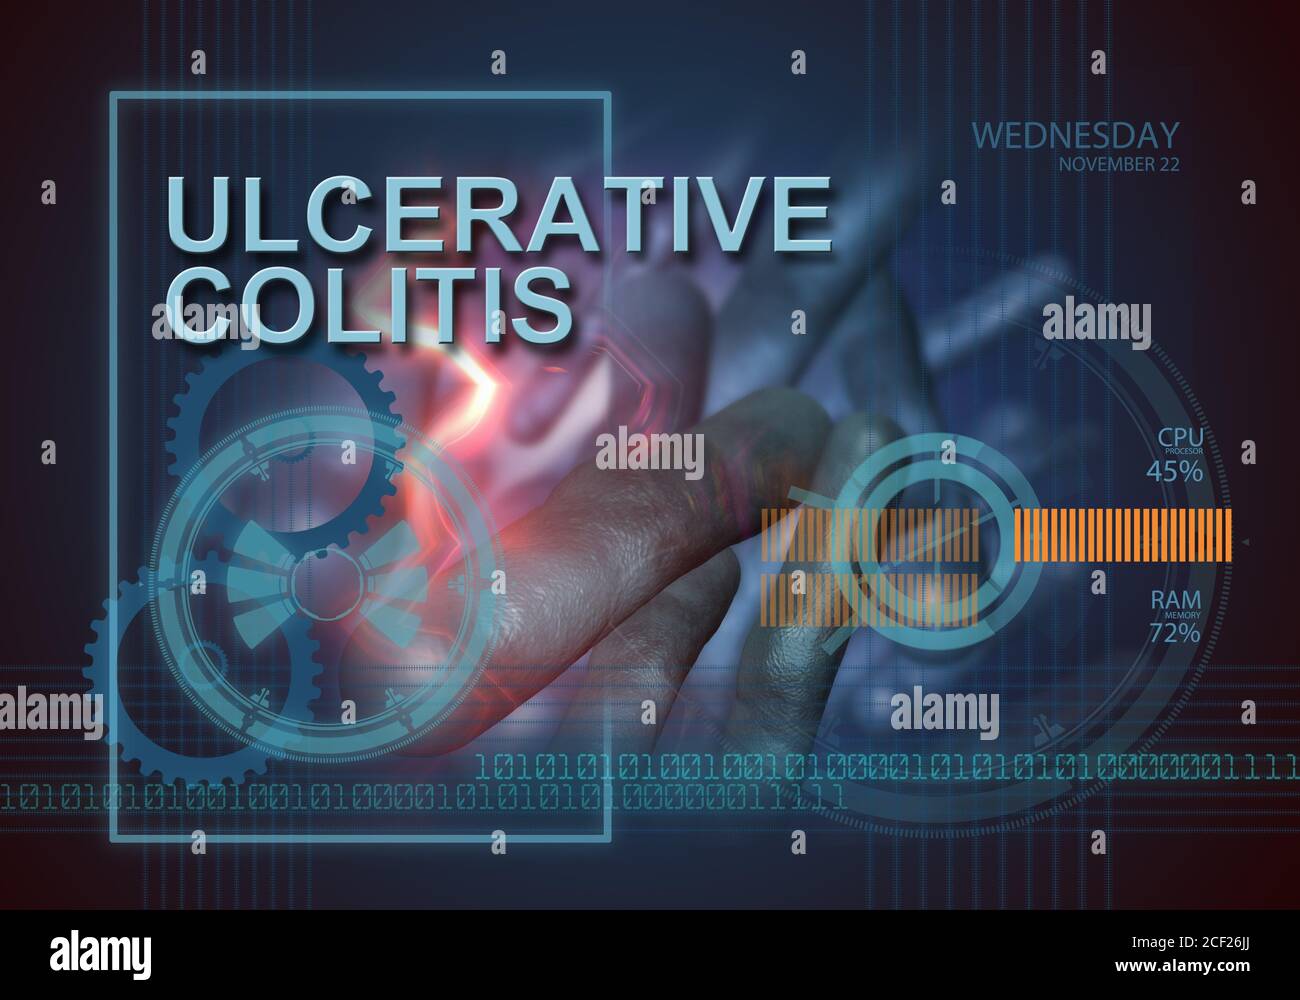 hi tech infographics of ulcerative colitis made in 3d software. Stock Photo